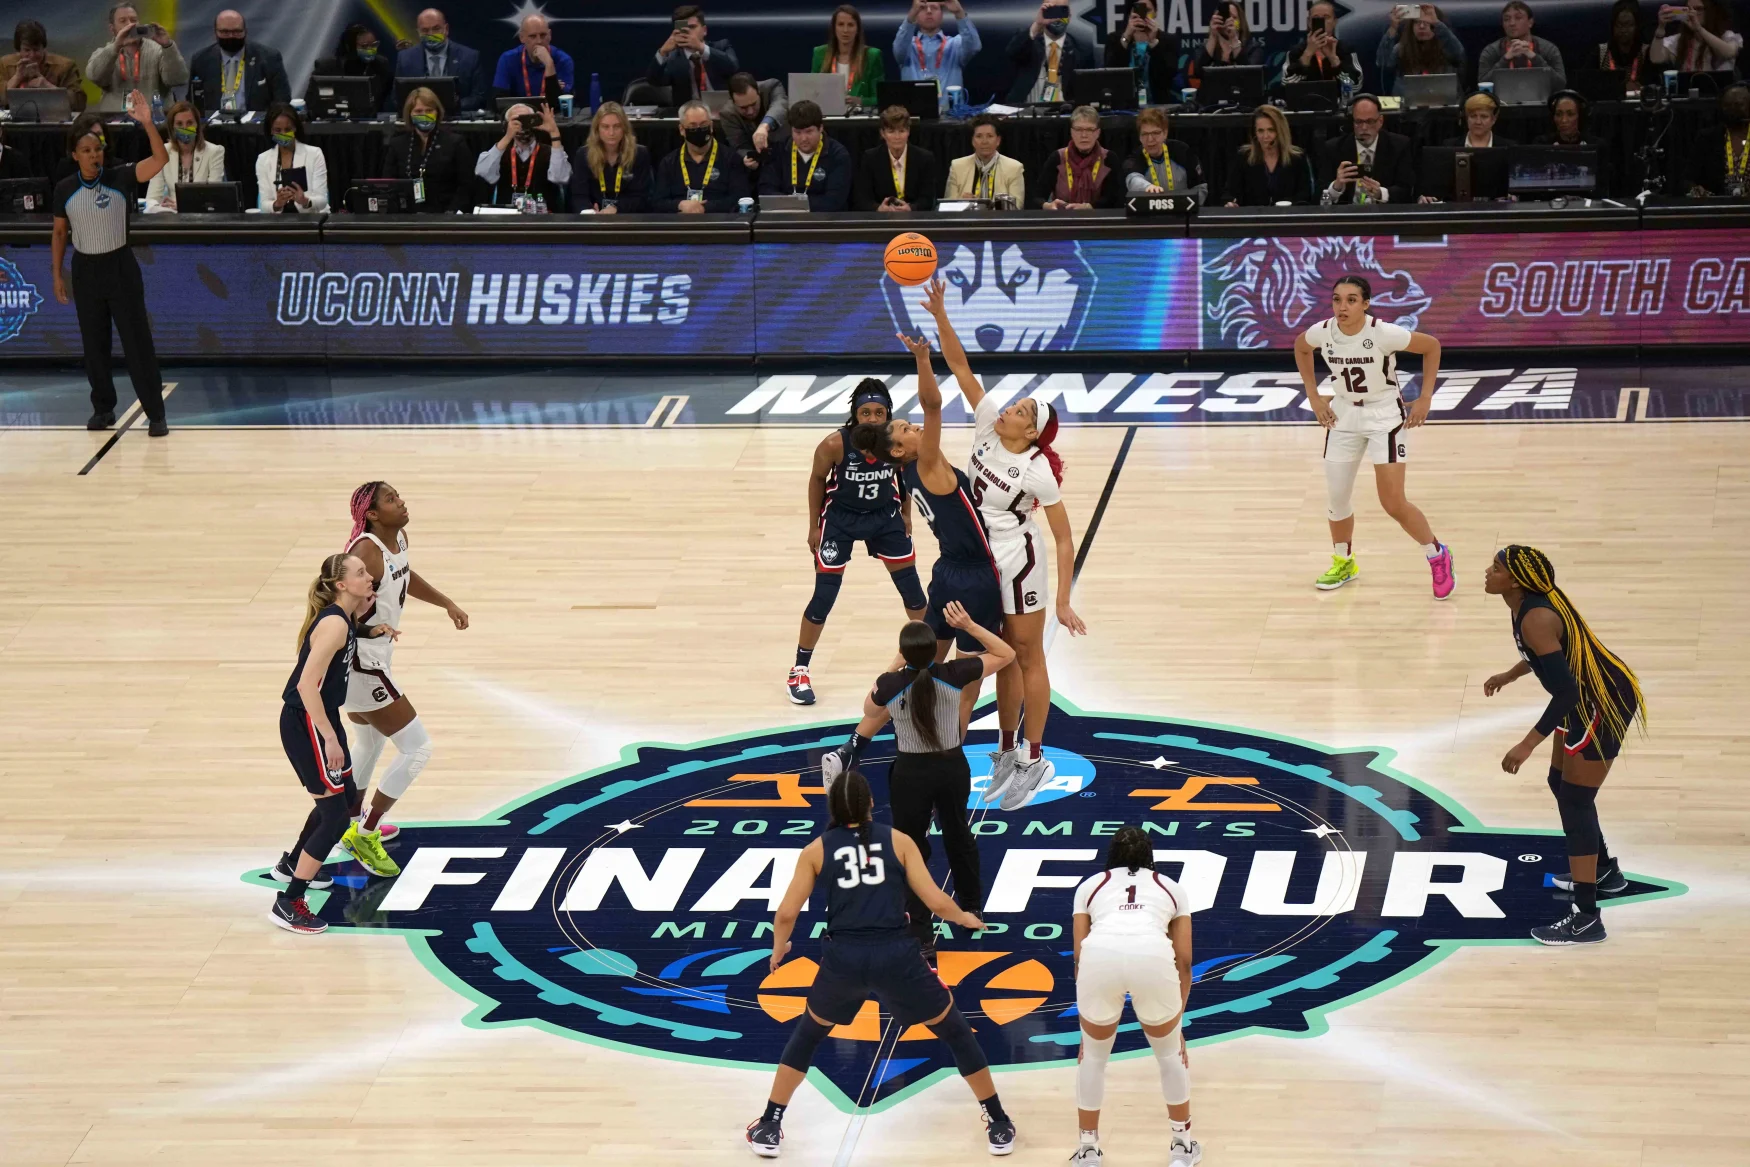 April 3, 2022;  Minneapolis, MN, USA;  A general overview of the opening denunciation between UConn Huskies forward Olivia Nelson-Ododa (20) and South Carolina Gamecocks forward Victaria Saxton (5) in the Final Four championship game of the NCAA Tournament women's college basketball at Target Center.  South Carolina defeated UConn 64-49.  Mandatory Credit: Kirby Lee - USA TODAY Sports